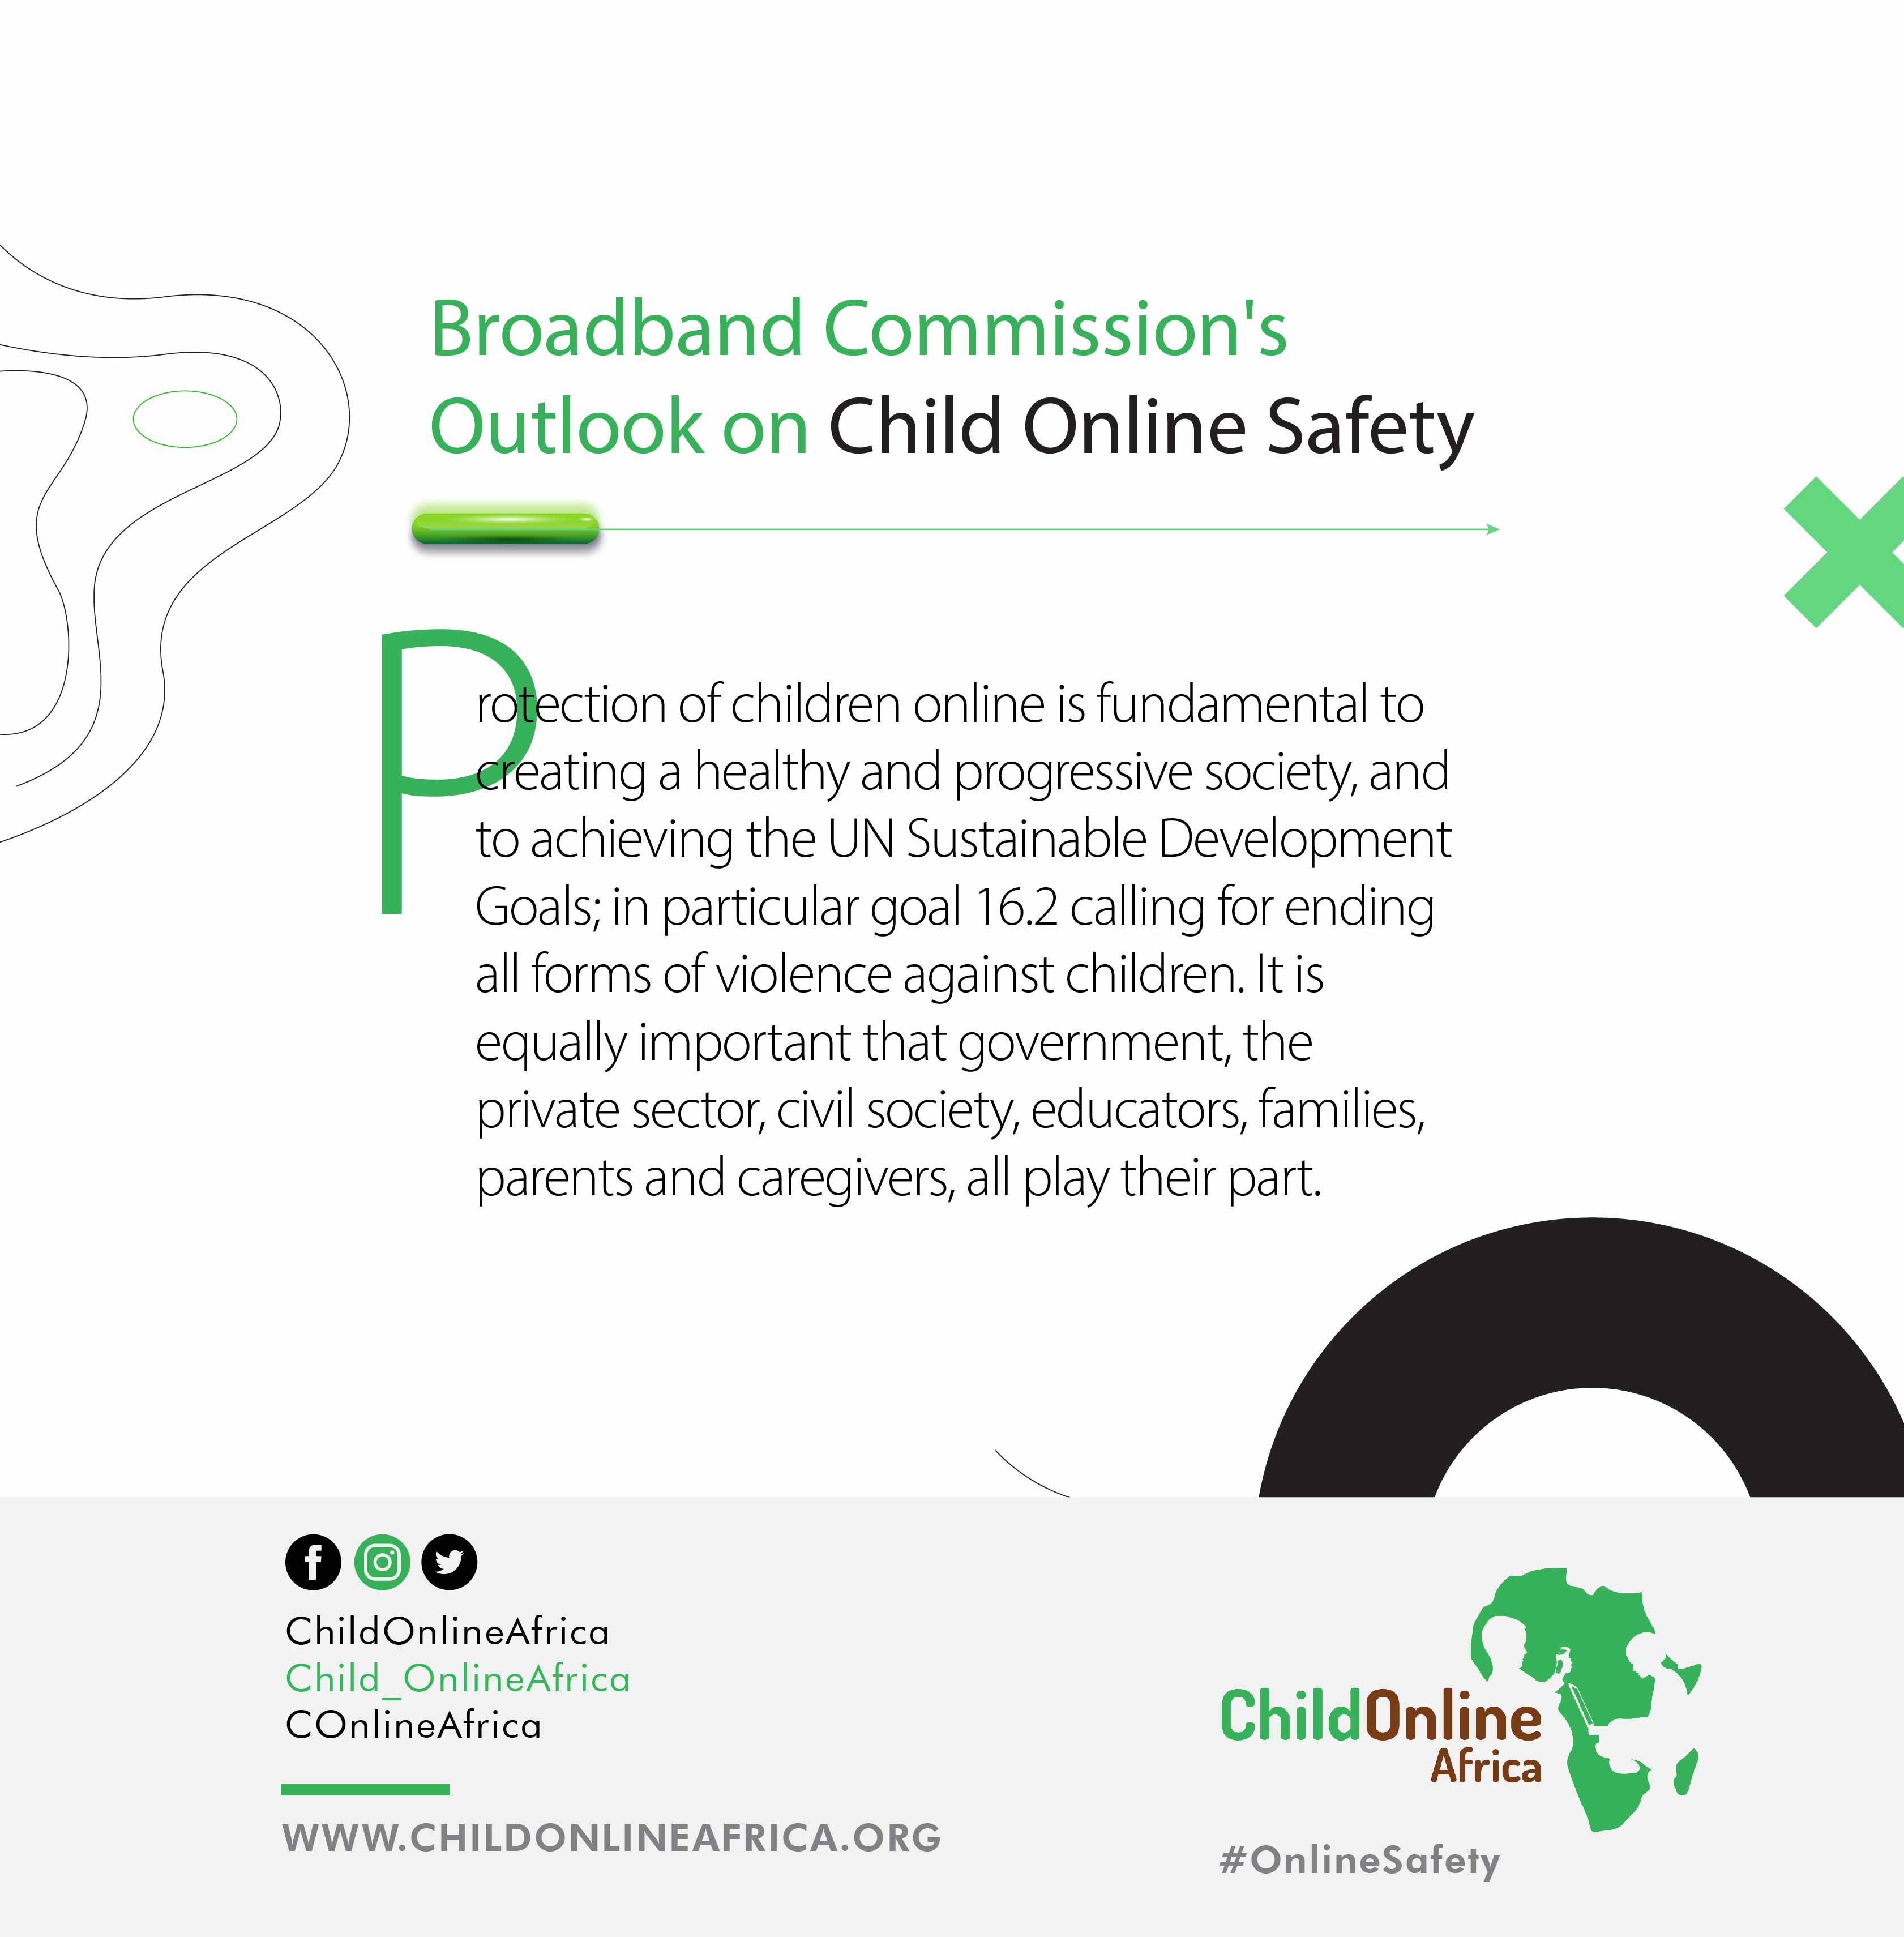 Child online protection in Africa